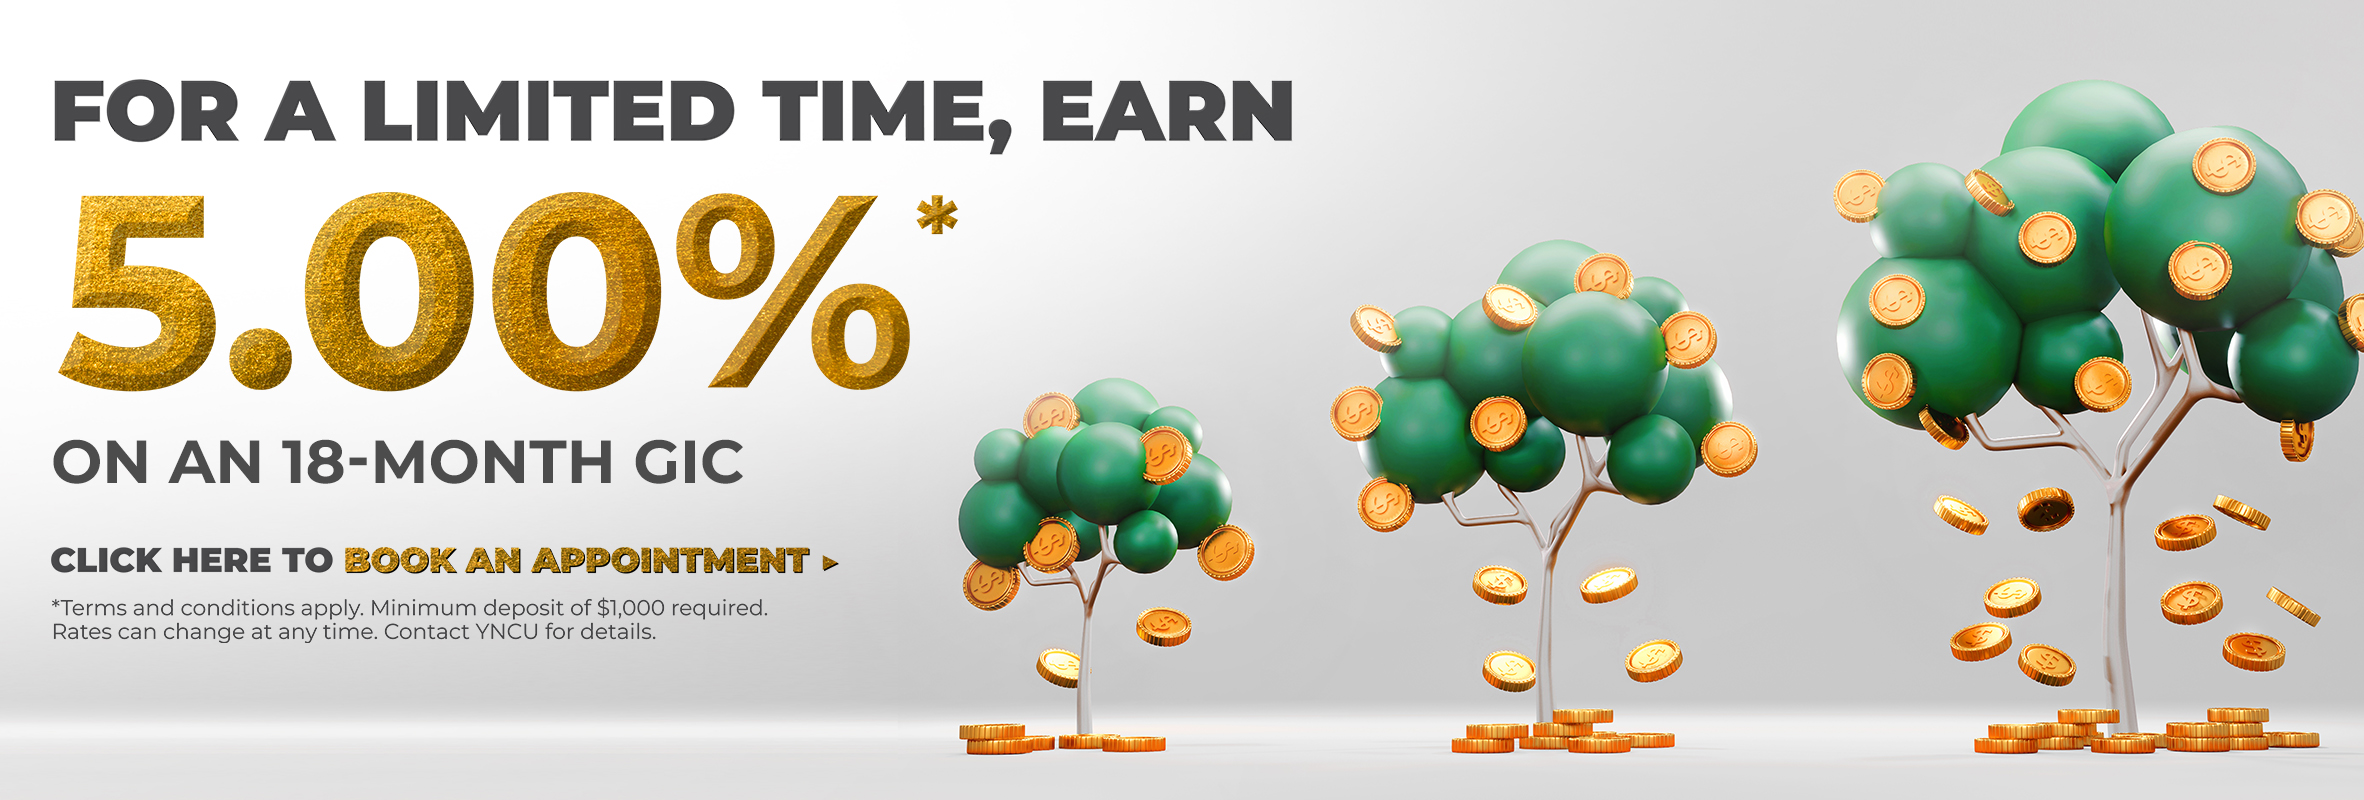 Cartoon trees with coins falling from them reads "for a limited time, earn 5.00%* on an 18-month GIC."